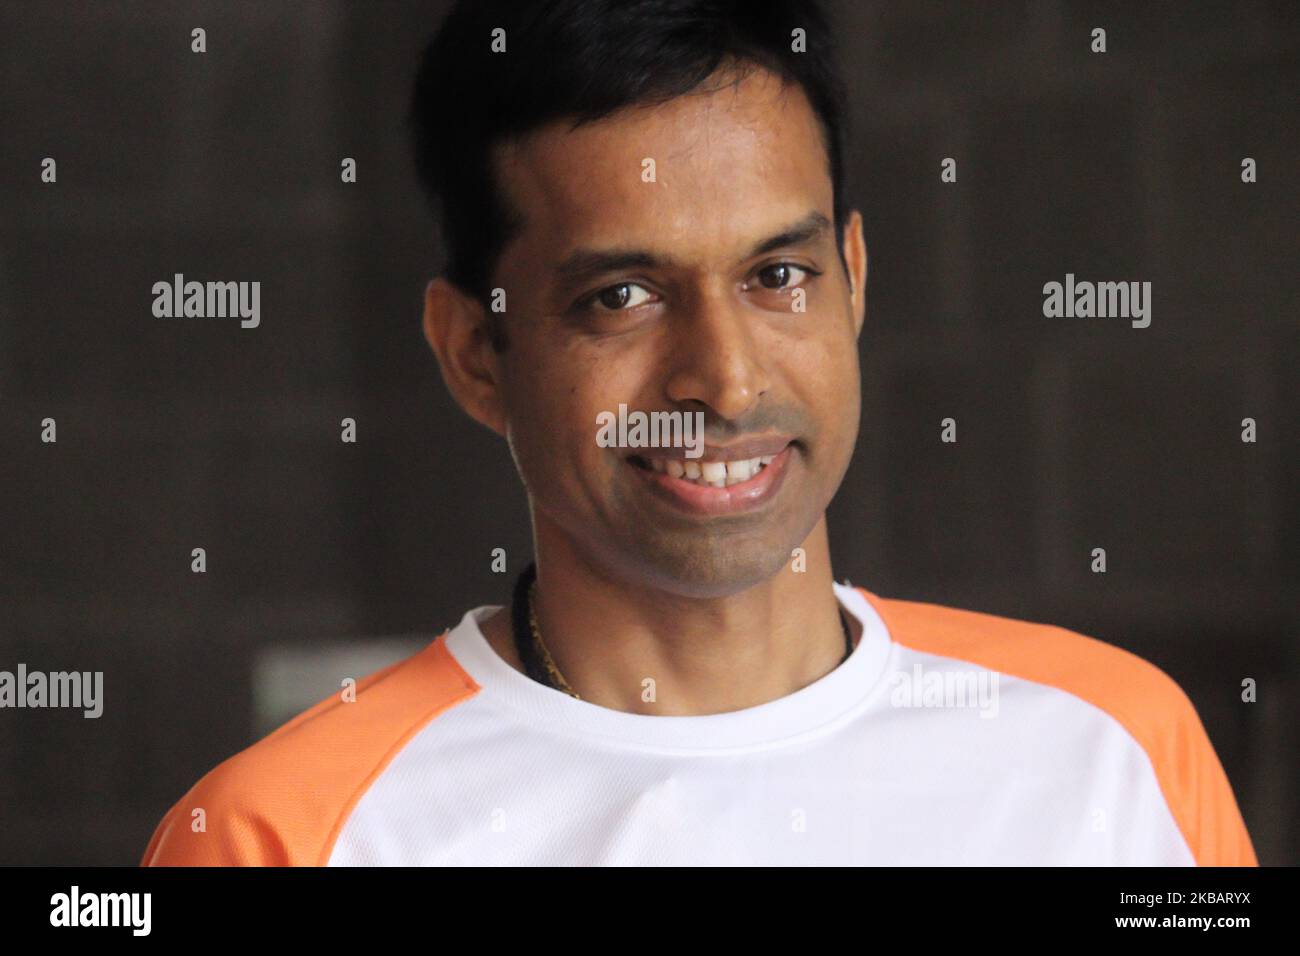 Former Indian badminton player Pullela Gopichand arrives during a launch of an initiative ‘Football Mania’ by IDBI Federal Life Insurance in Mumbai, India on 12 November 2019. The initiative aimed to provide top-quality football coaching to over 10,000 kid in the city. (Photo by Himanshu Bhatt/NurPhoto) Stock Photo